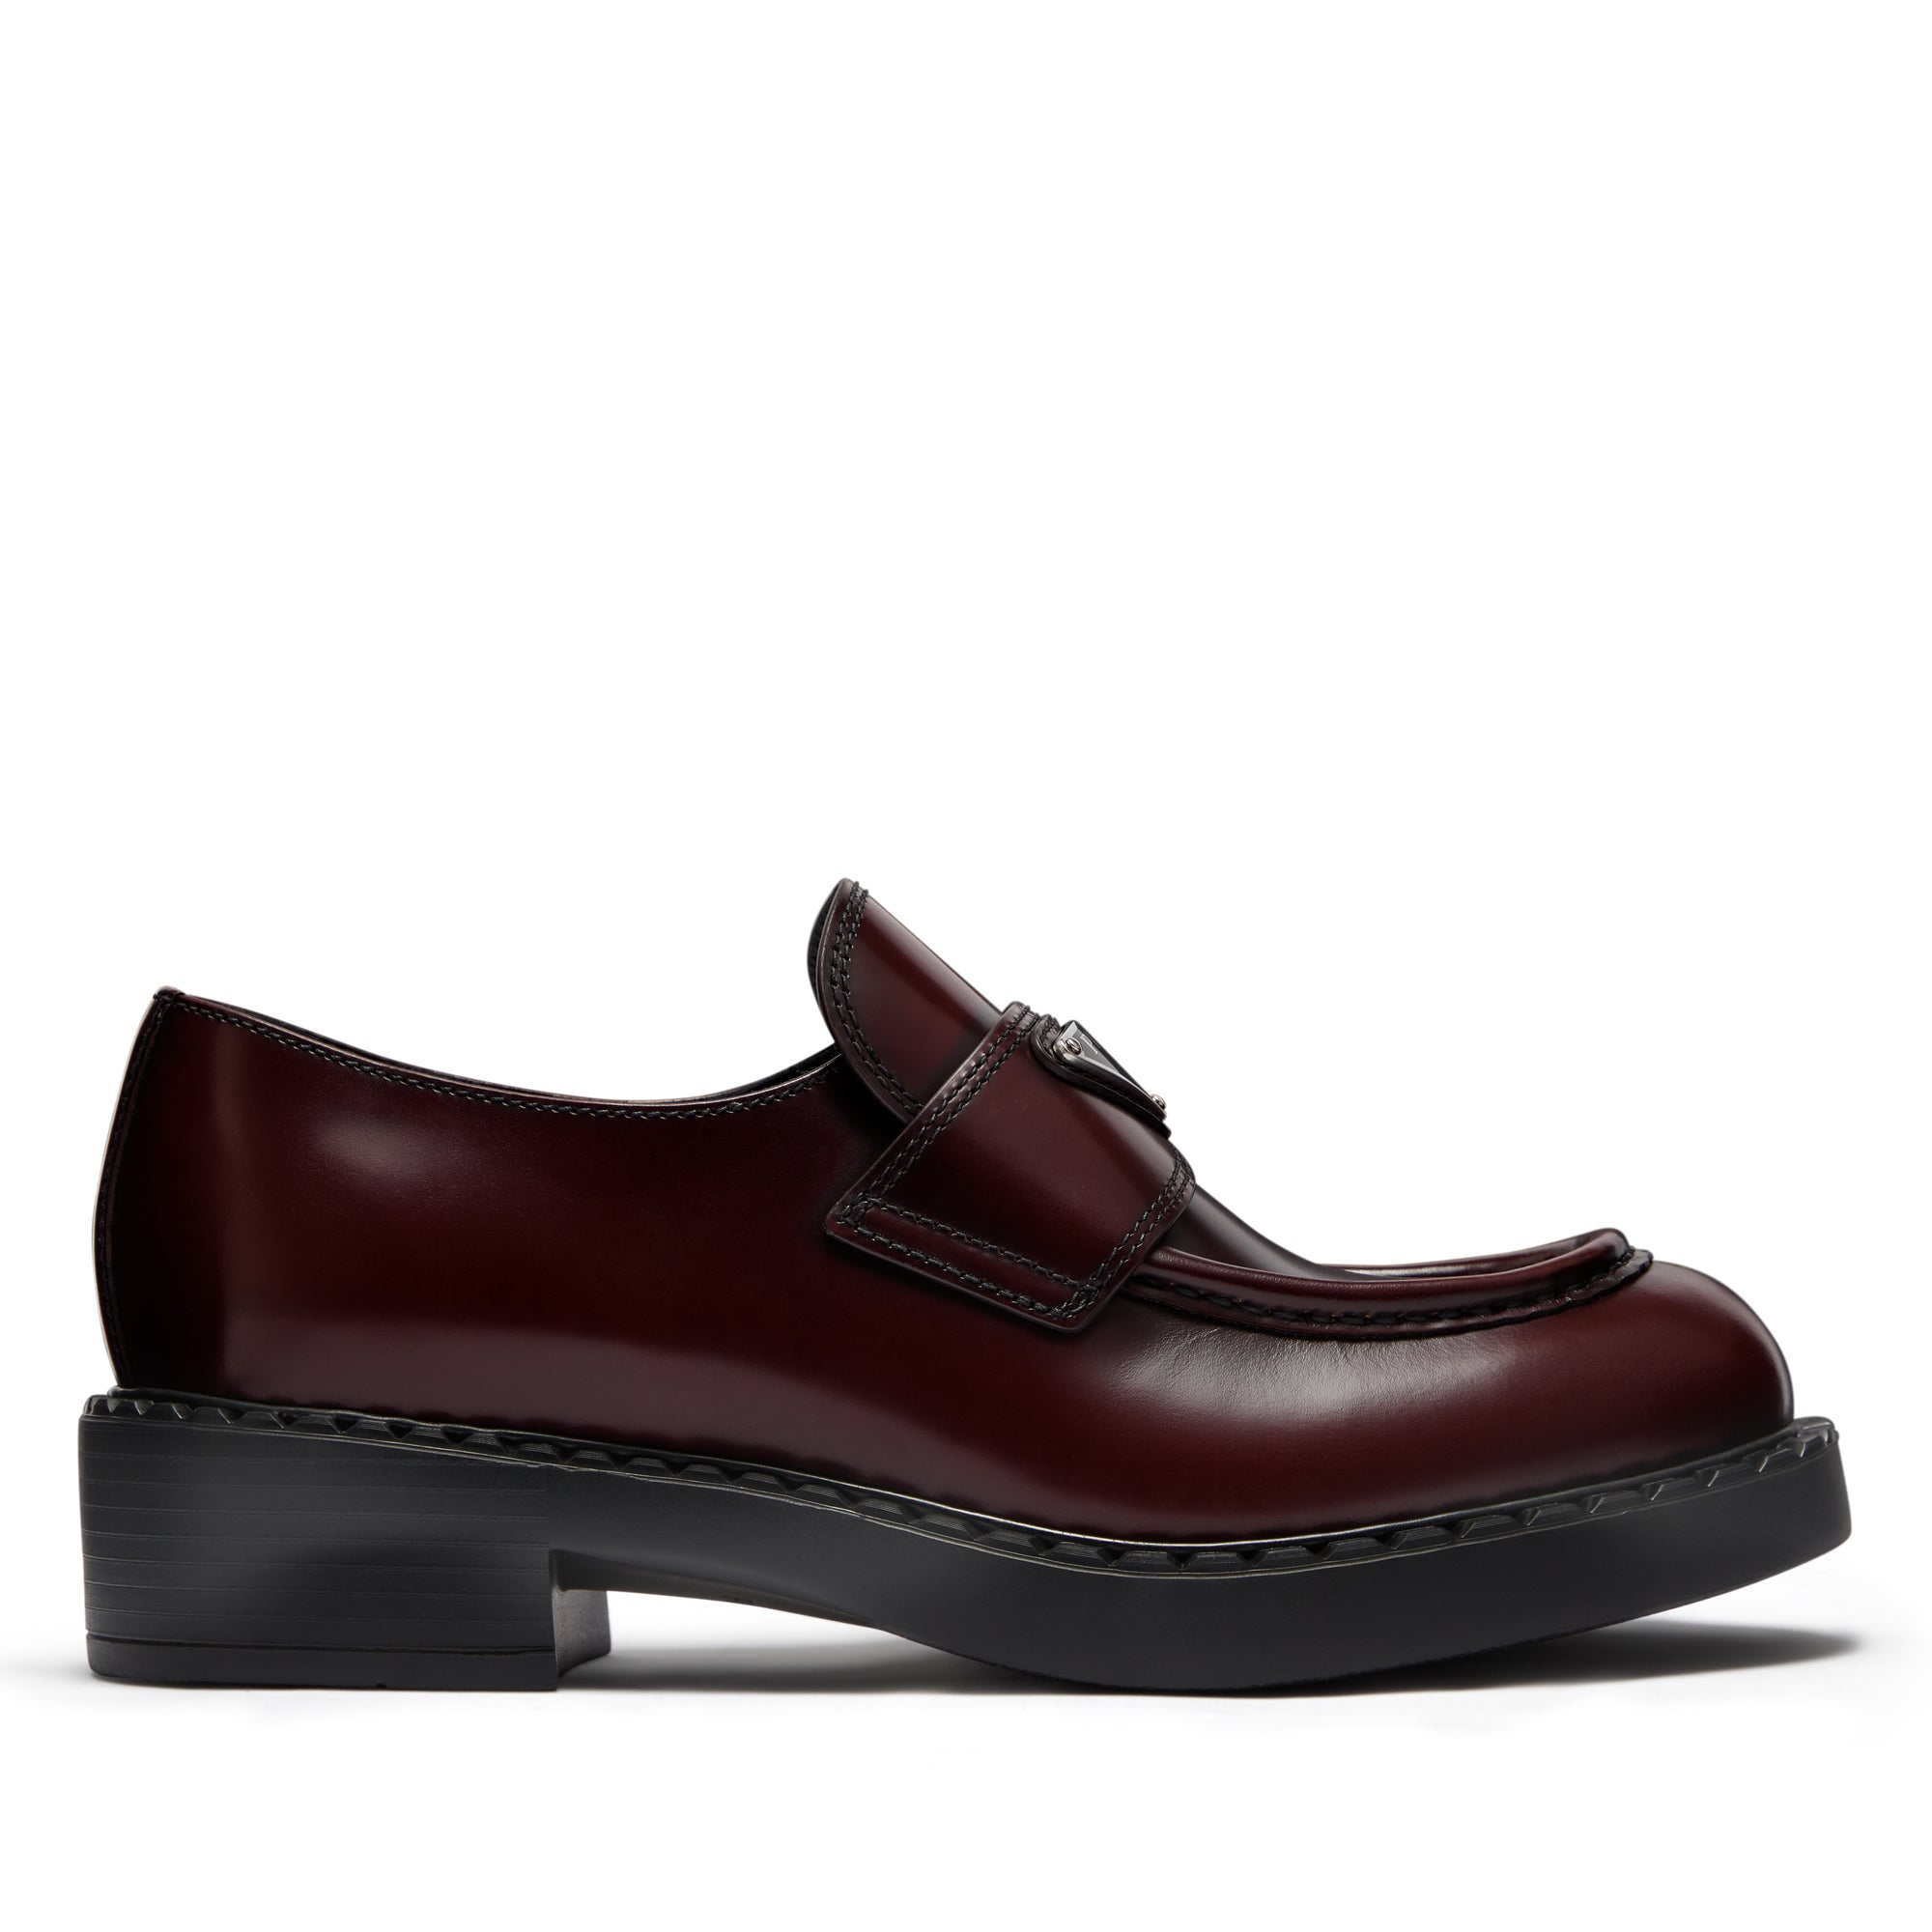 Prada - Women’s Brushed Leather Loafer - (Cordovan) view 1